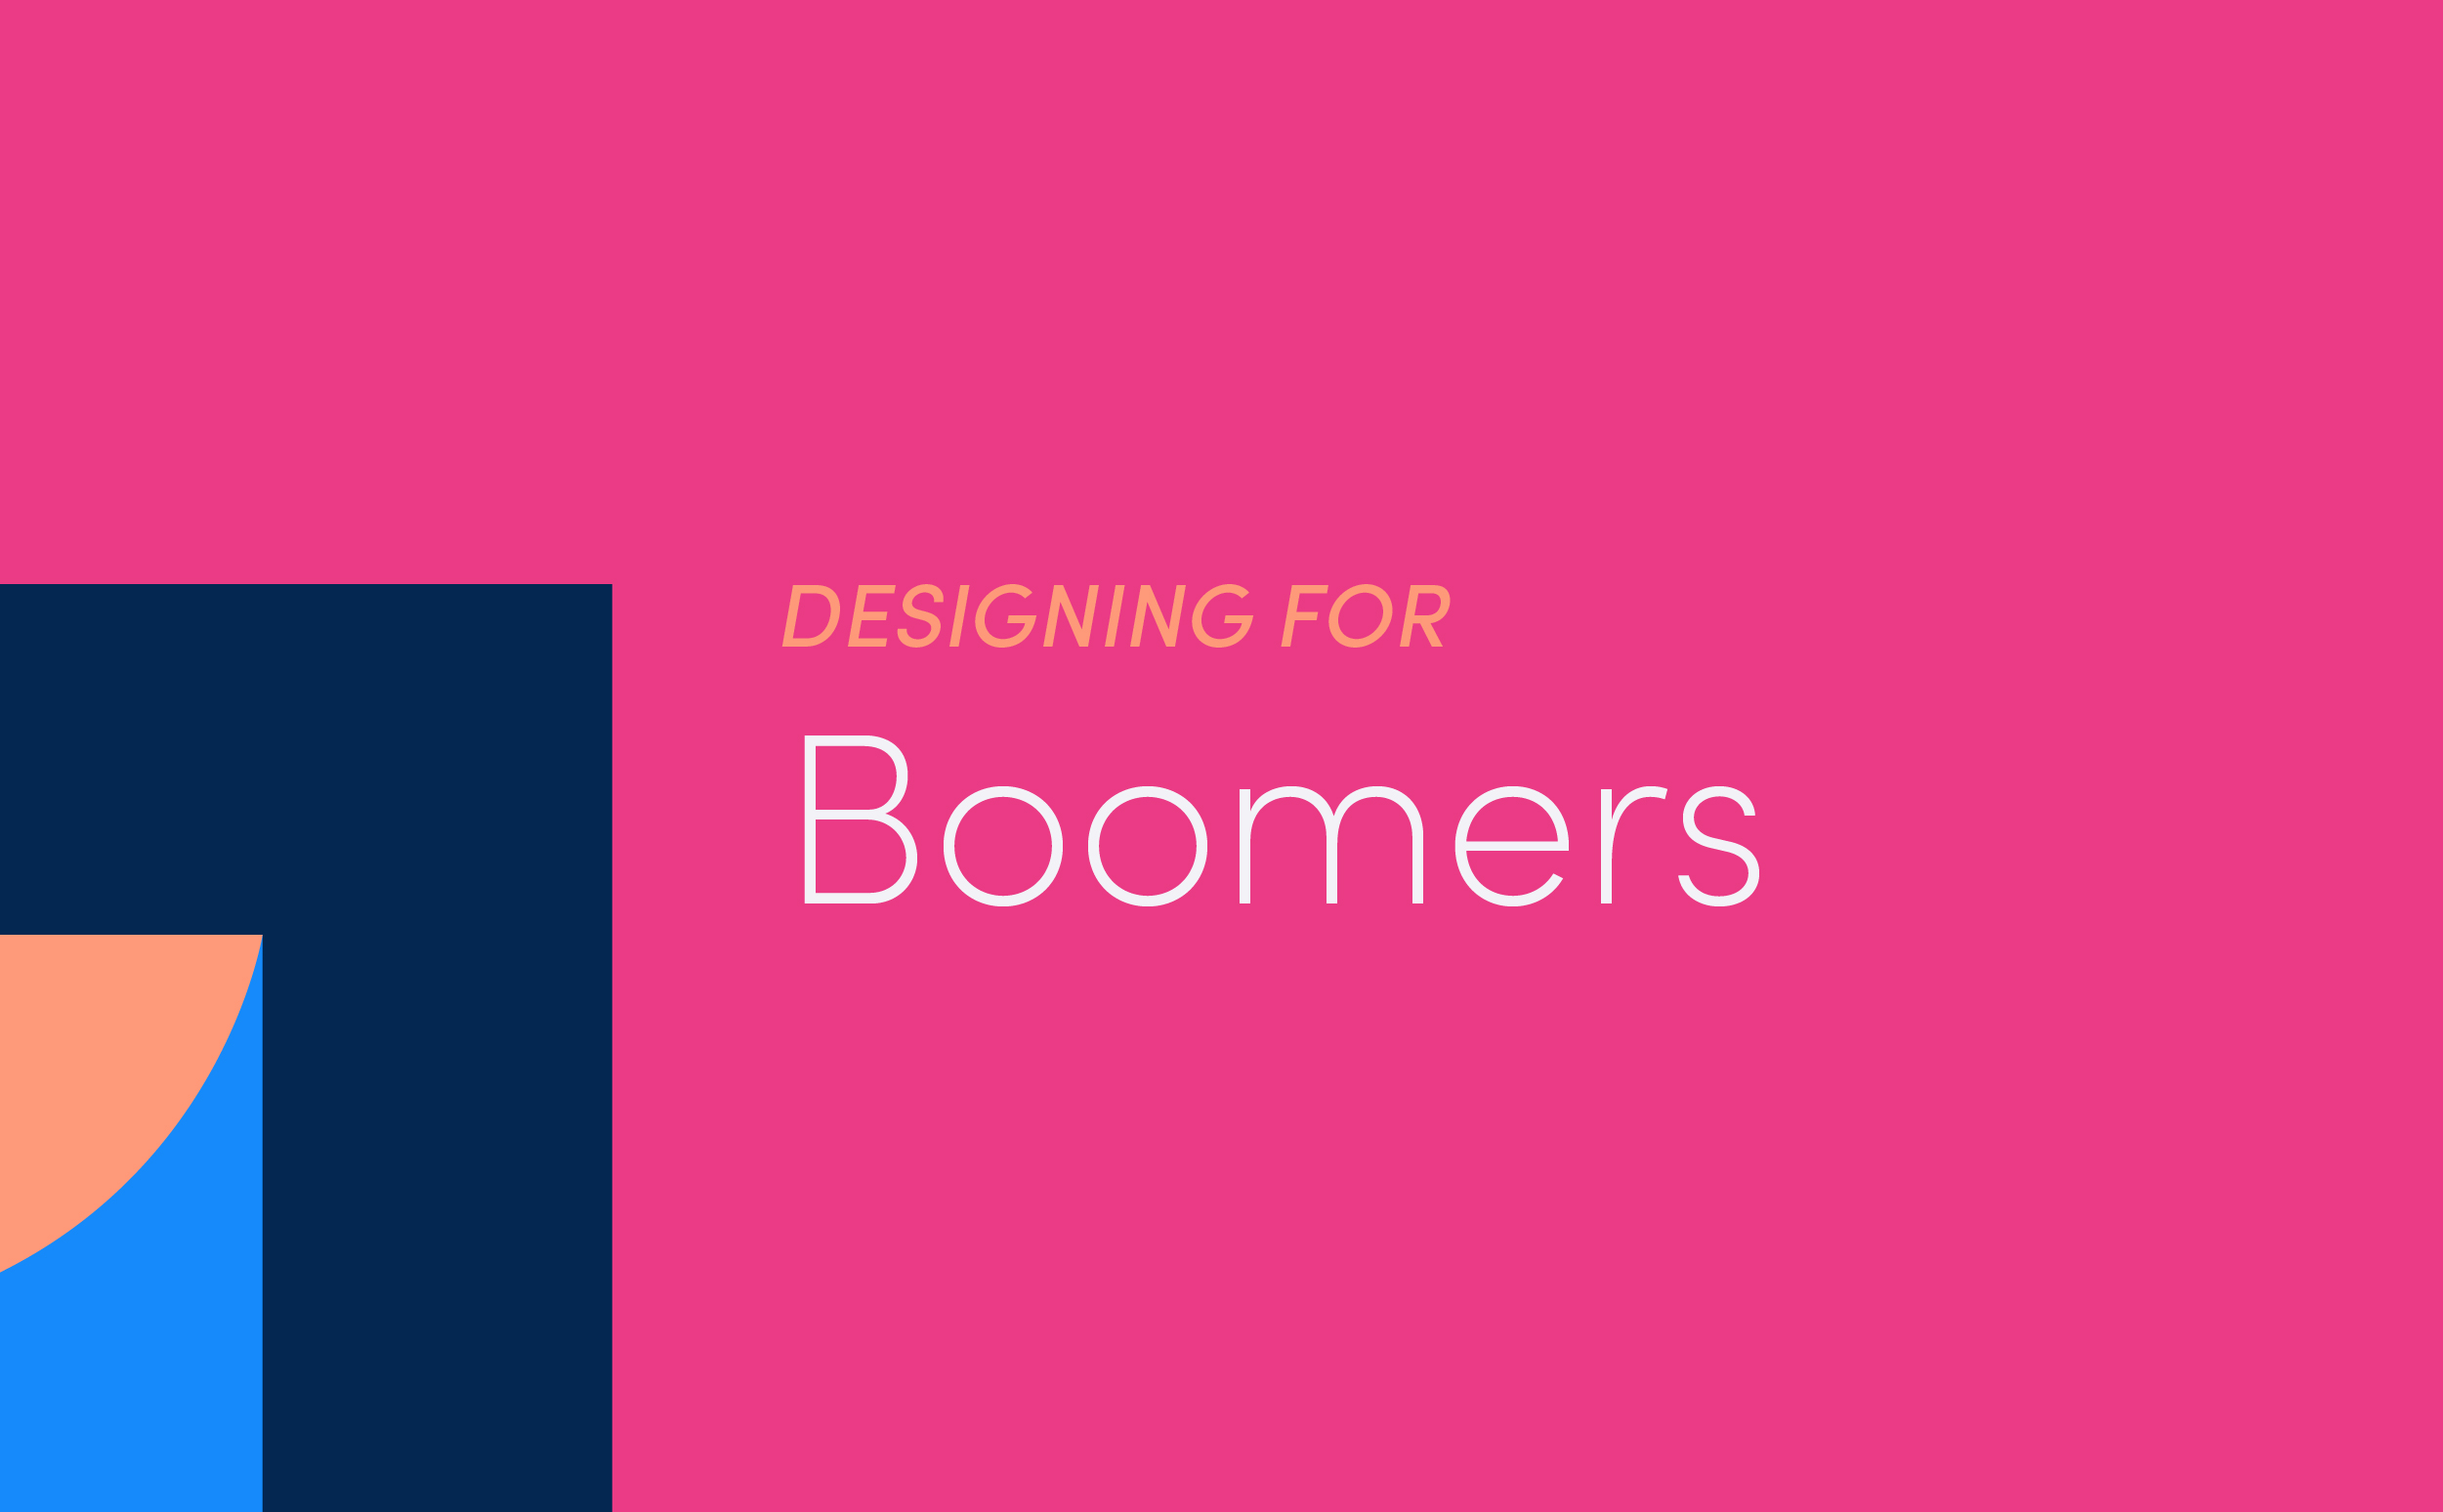 Designing for Baby Boomers Image